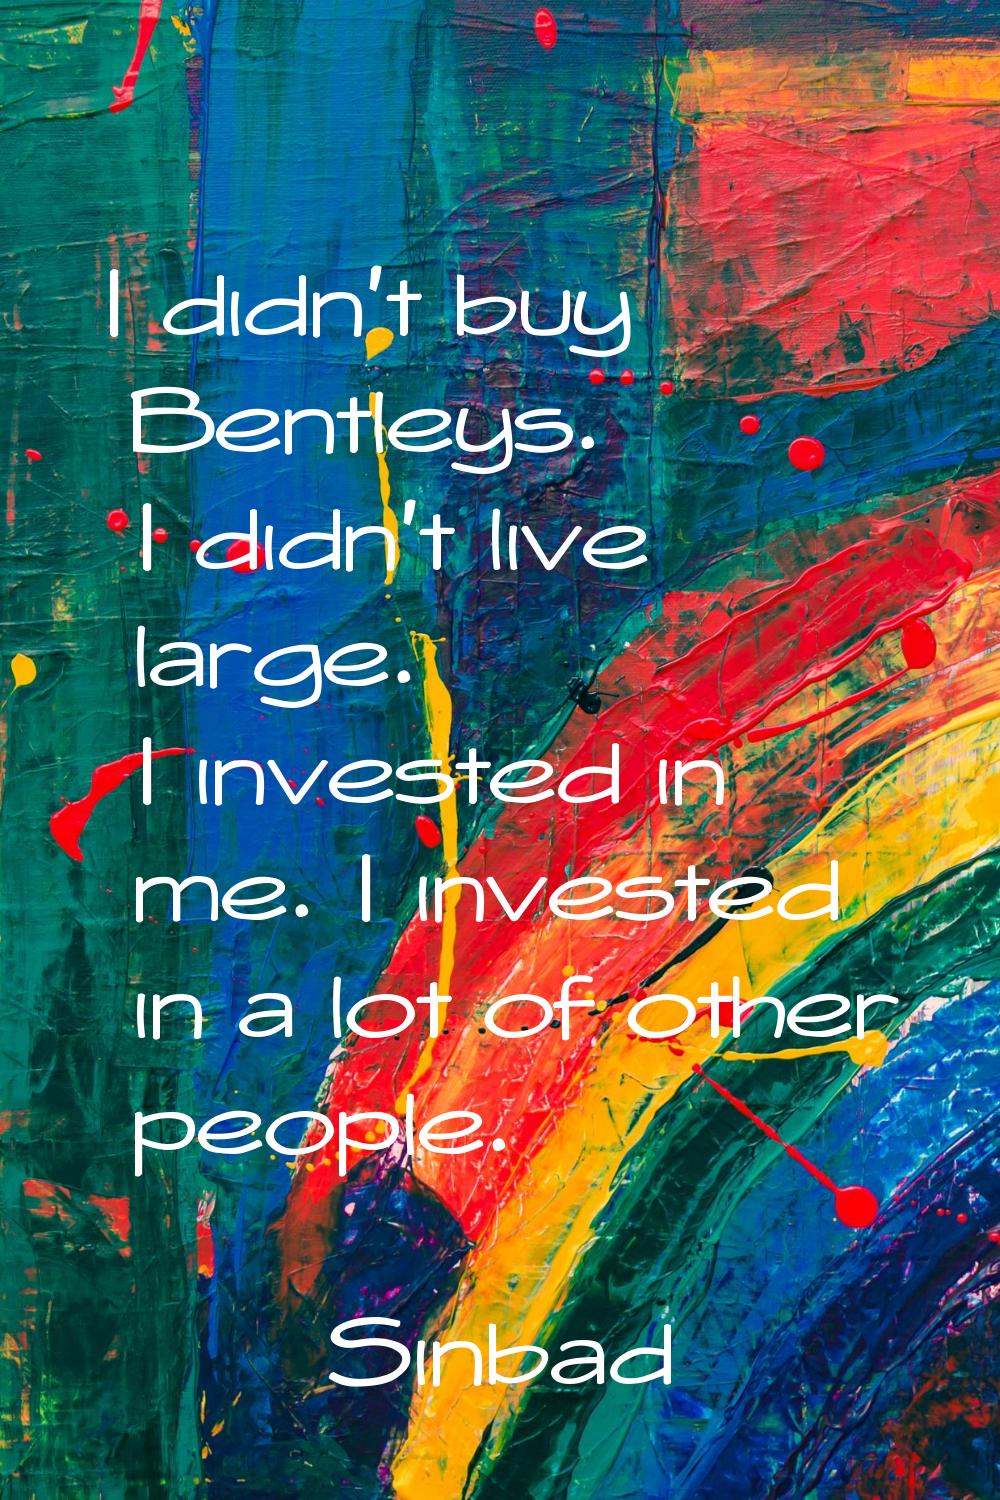 I didn't buy Bentleys. I didn't live large. I invested in me. I invested in a lot of other people.